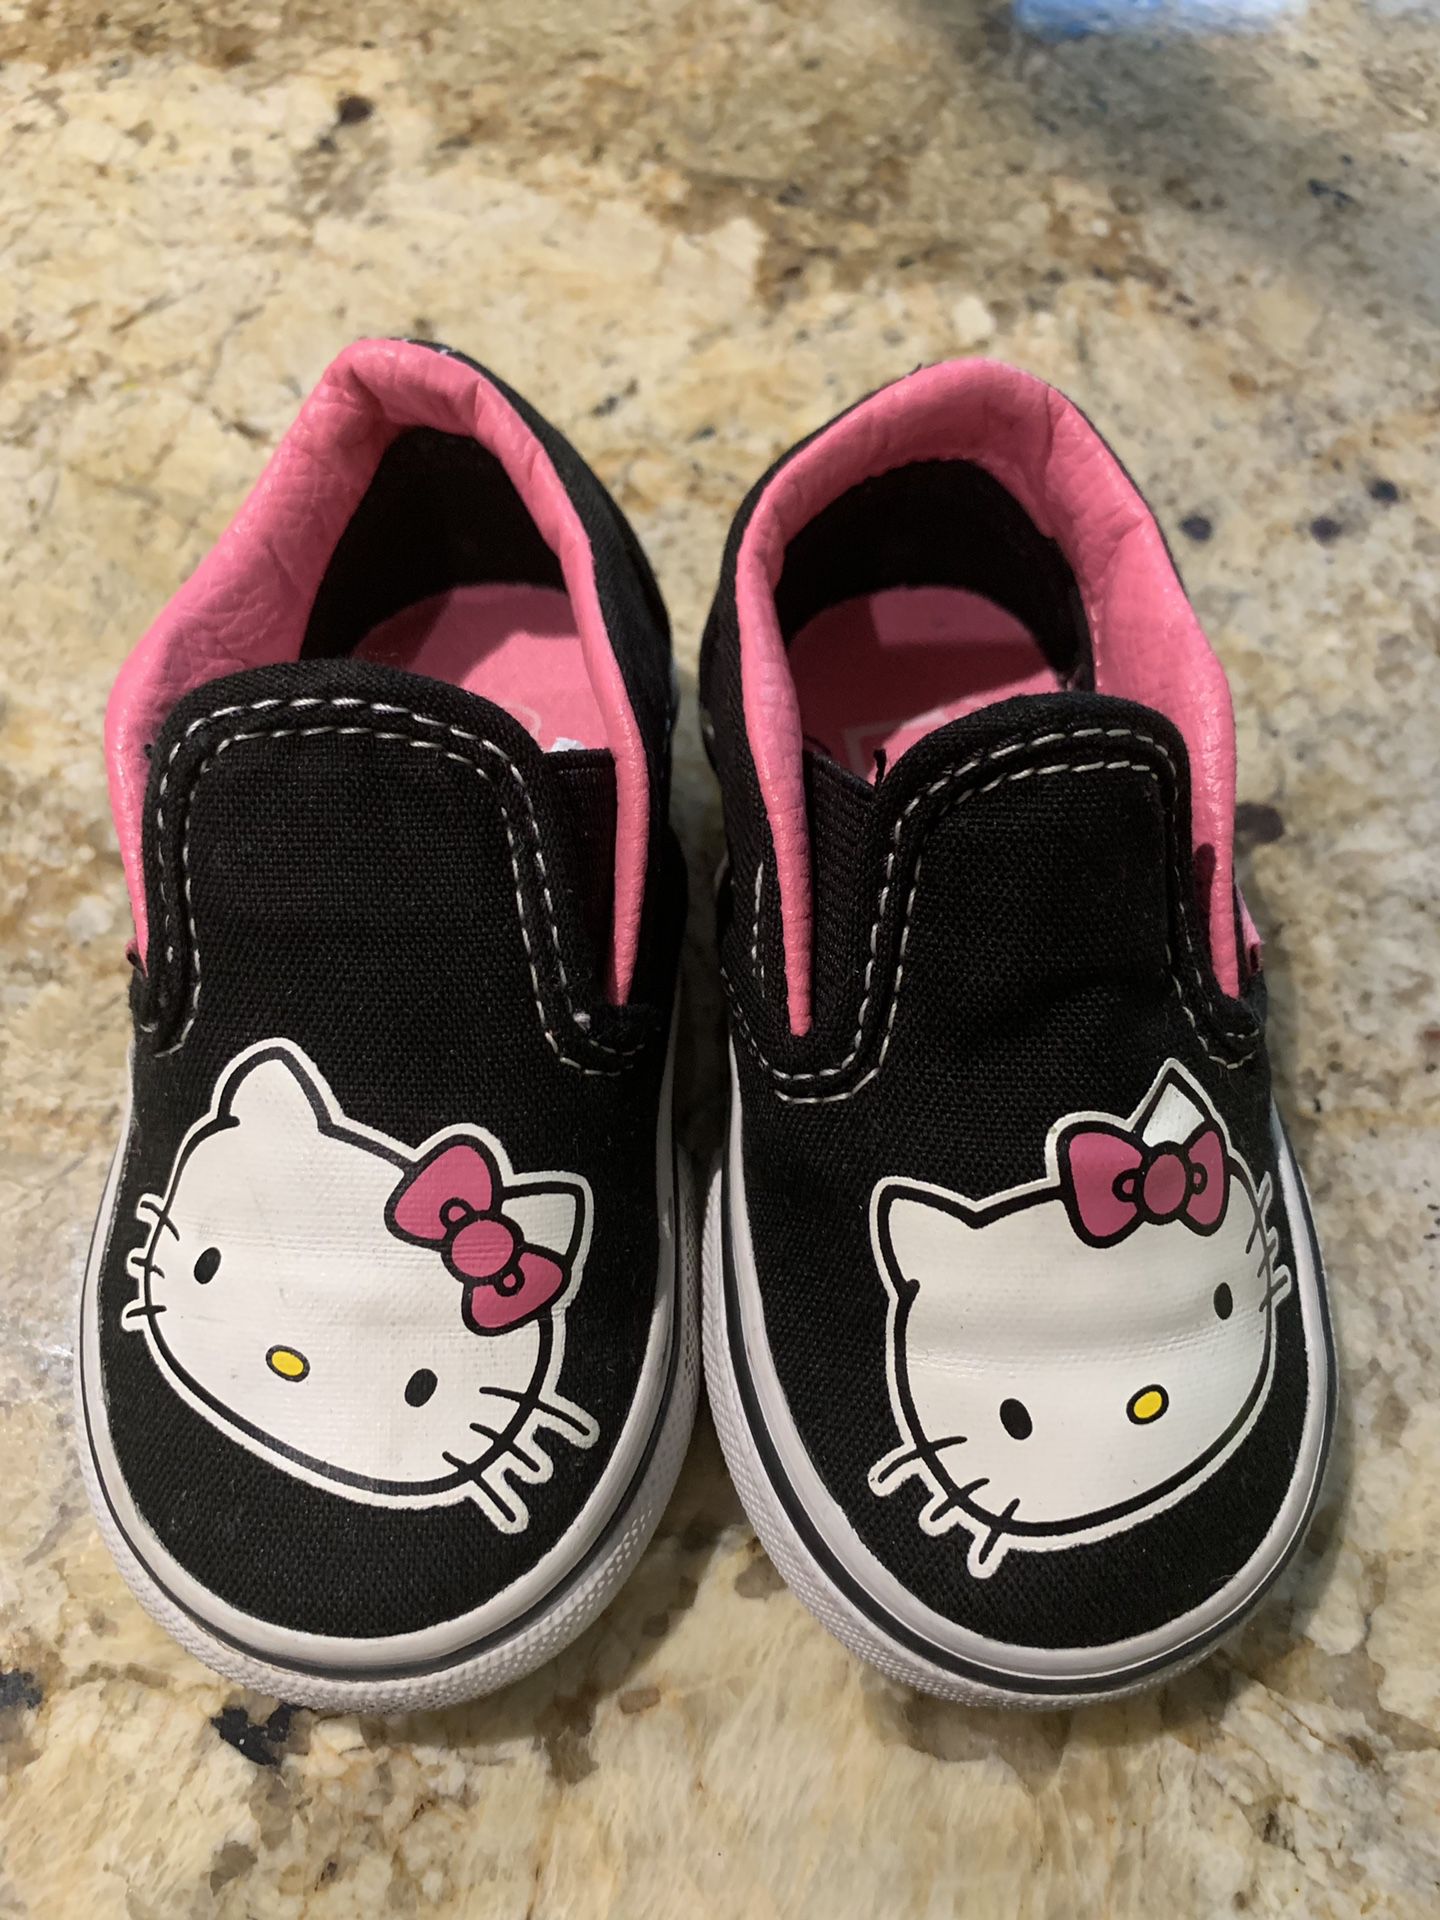 Hello kitty vans shoes